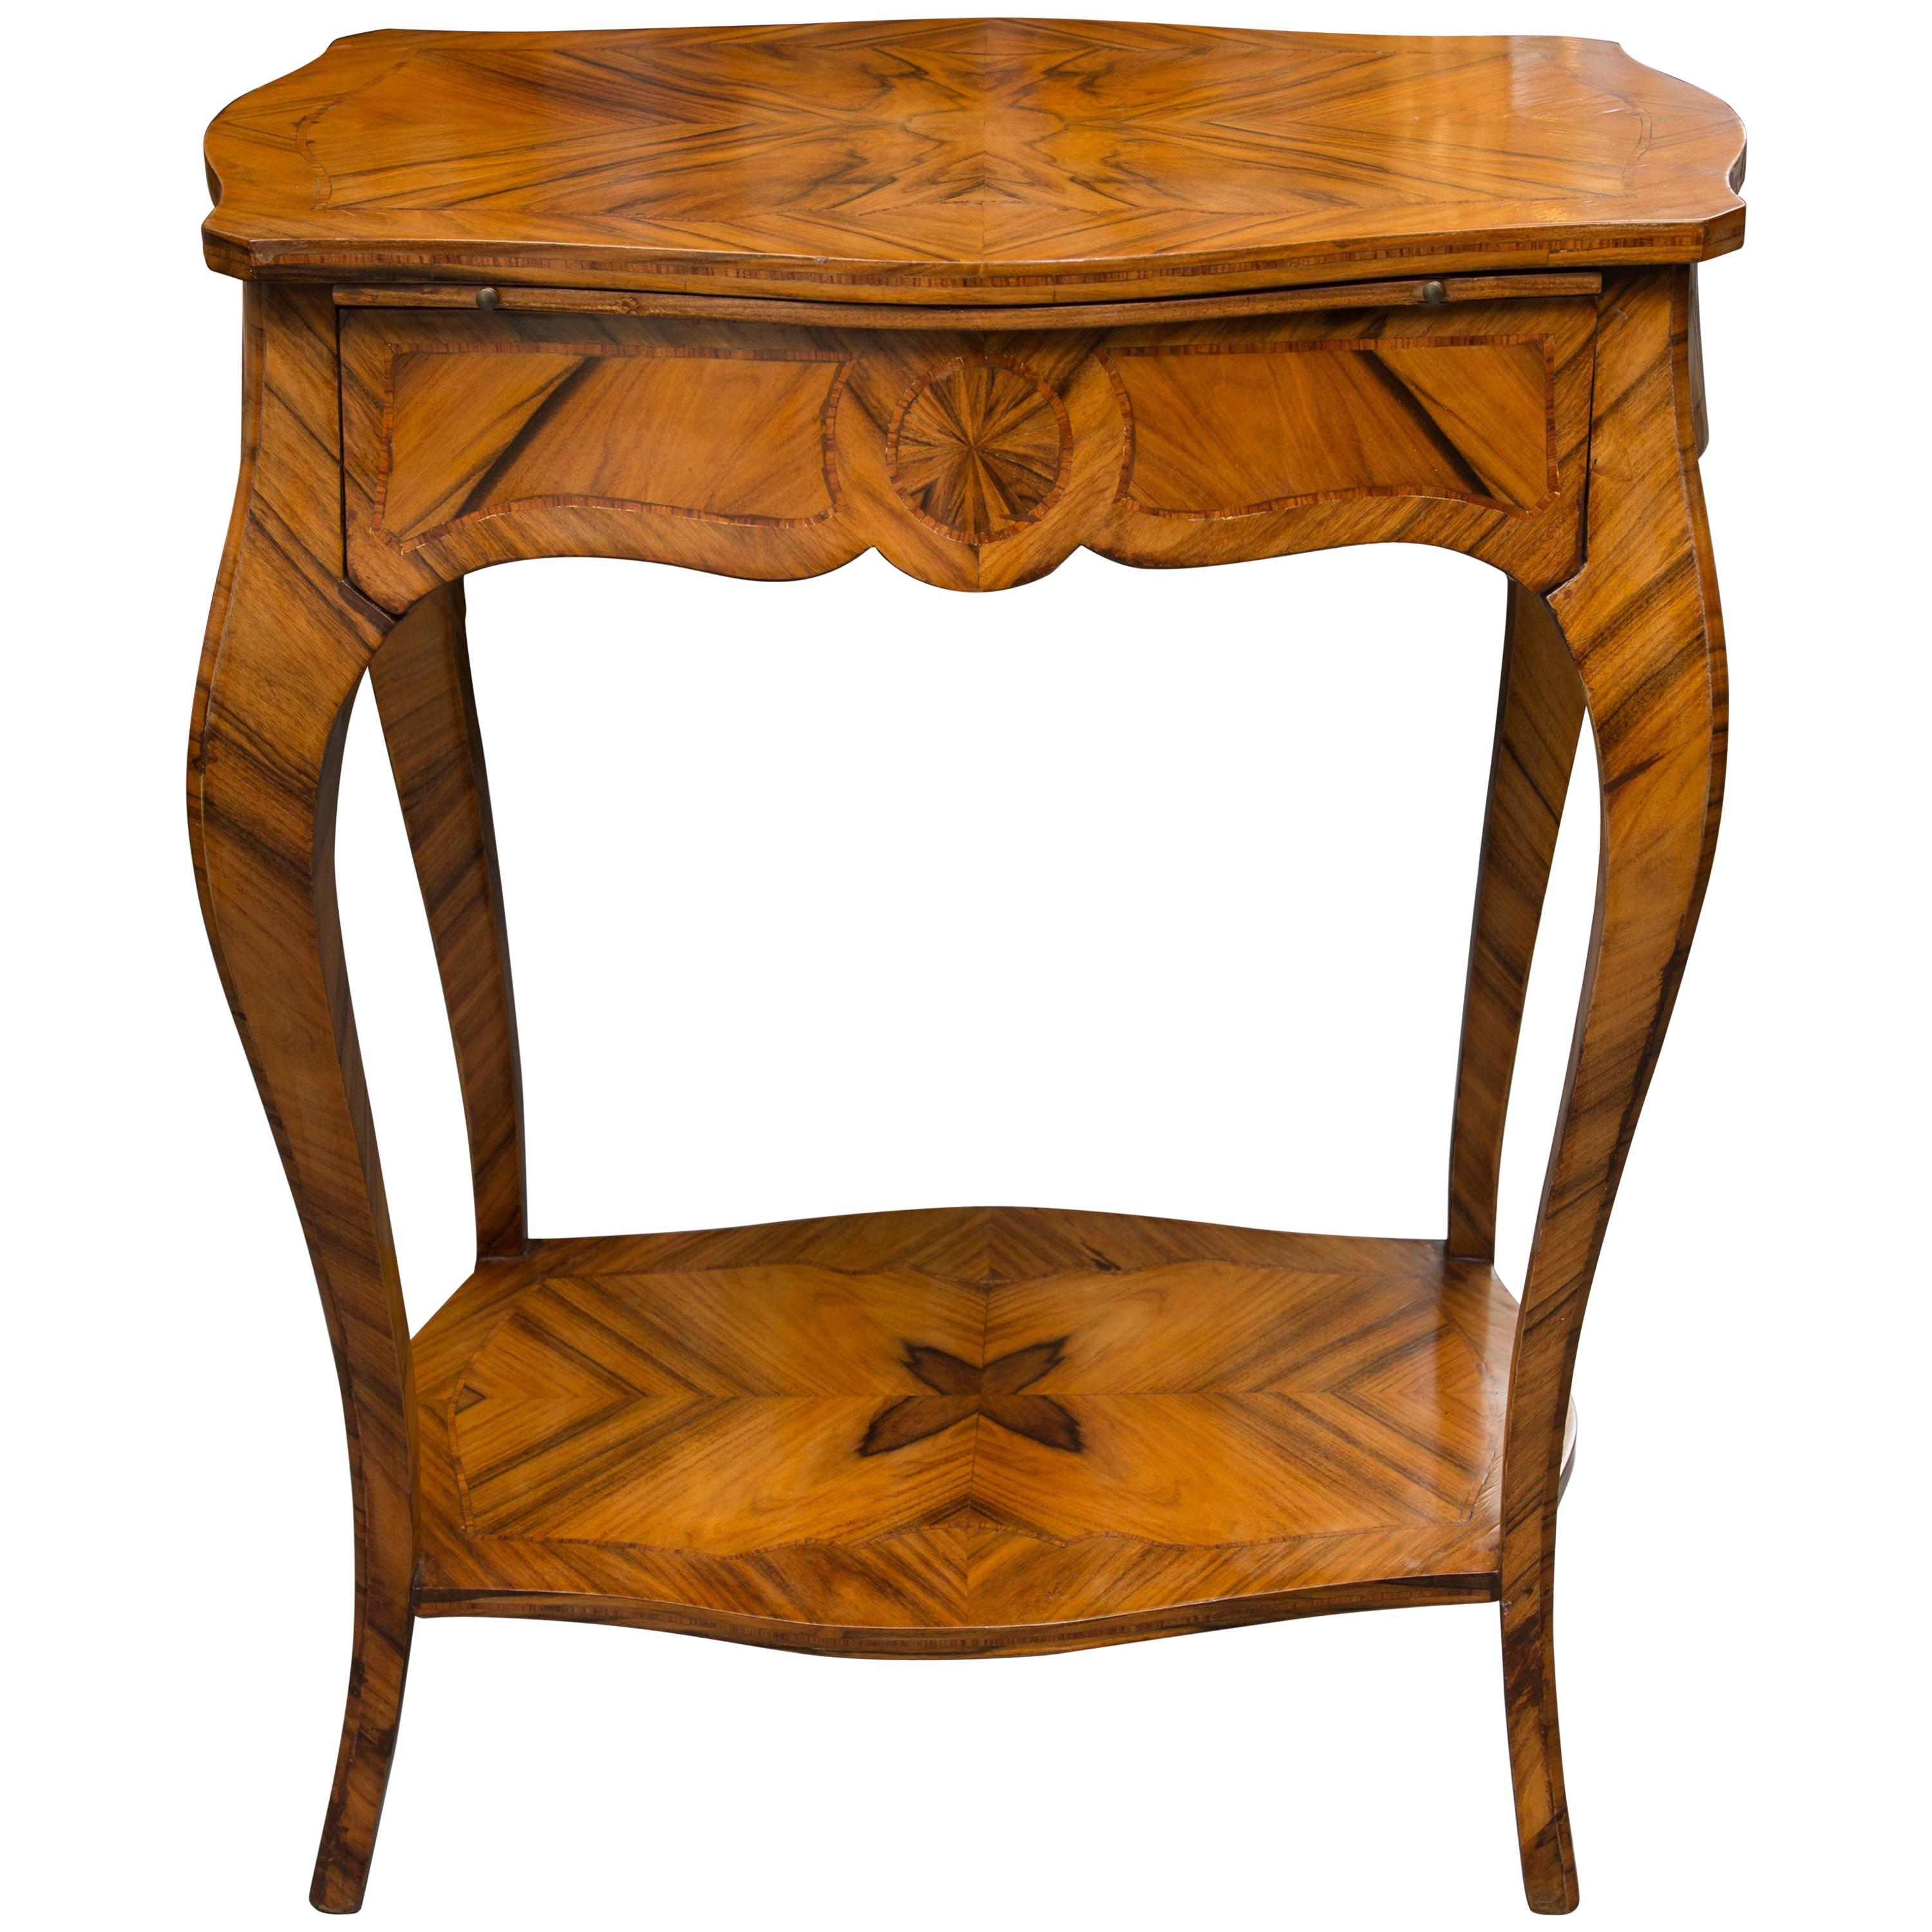 19th Century, Louis XV Style Kingwood Two-Tier Occasional Table